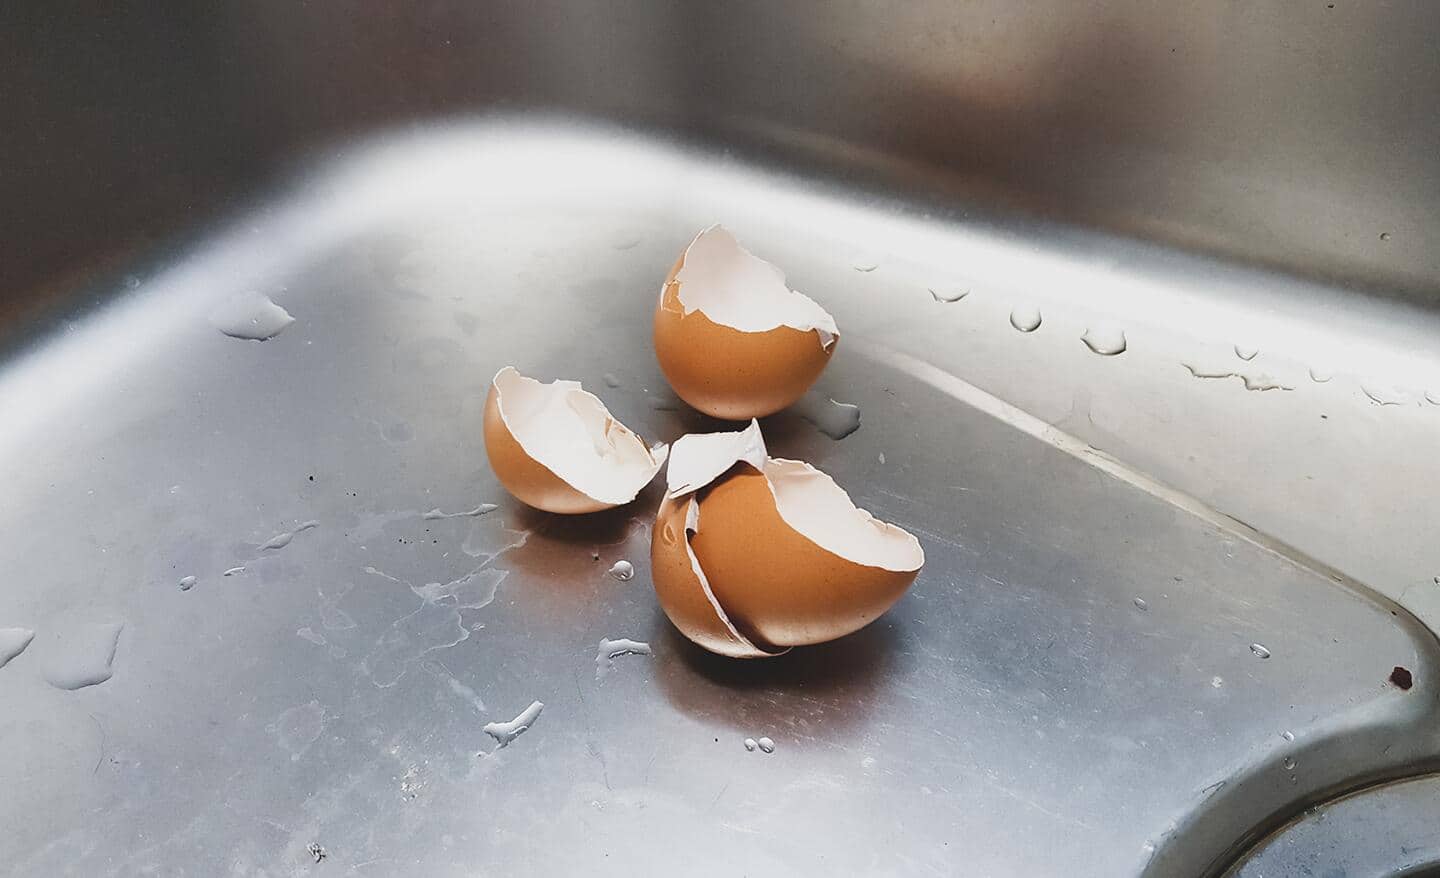 Broken egg shells laying in a sink.